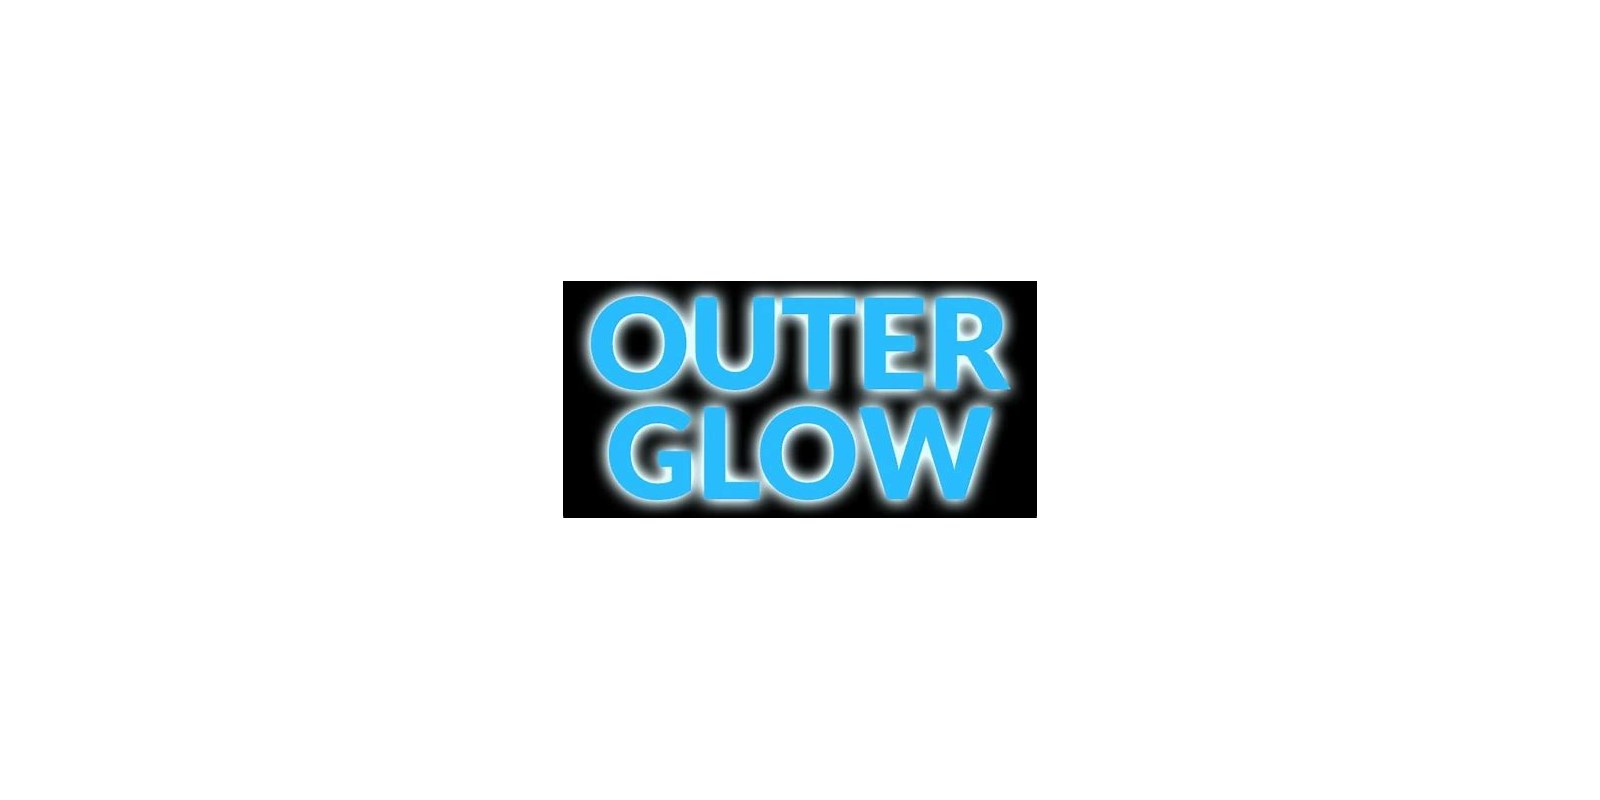 Outer Glow